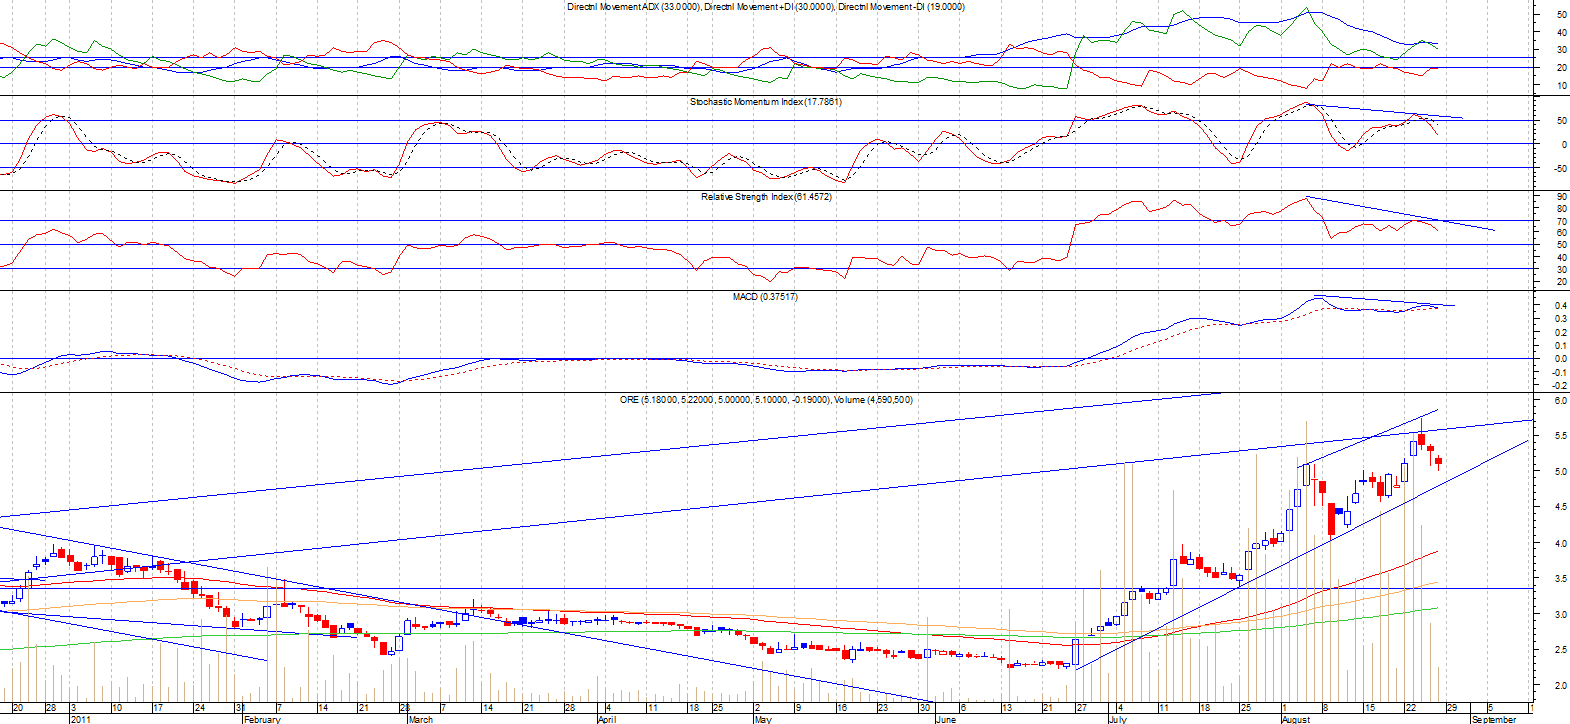 Me-Six: Technical Analysis of the Philippine Stock Market: August 2011